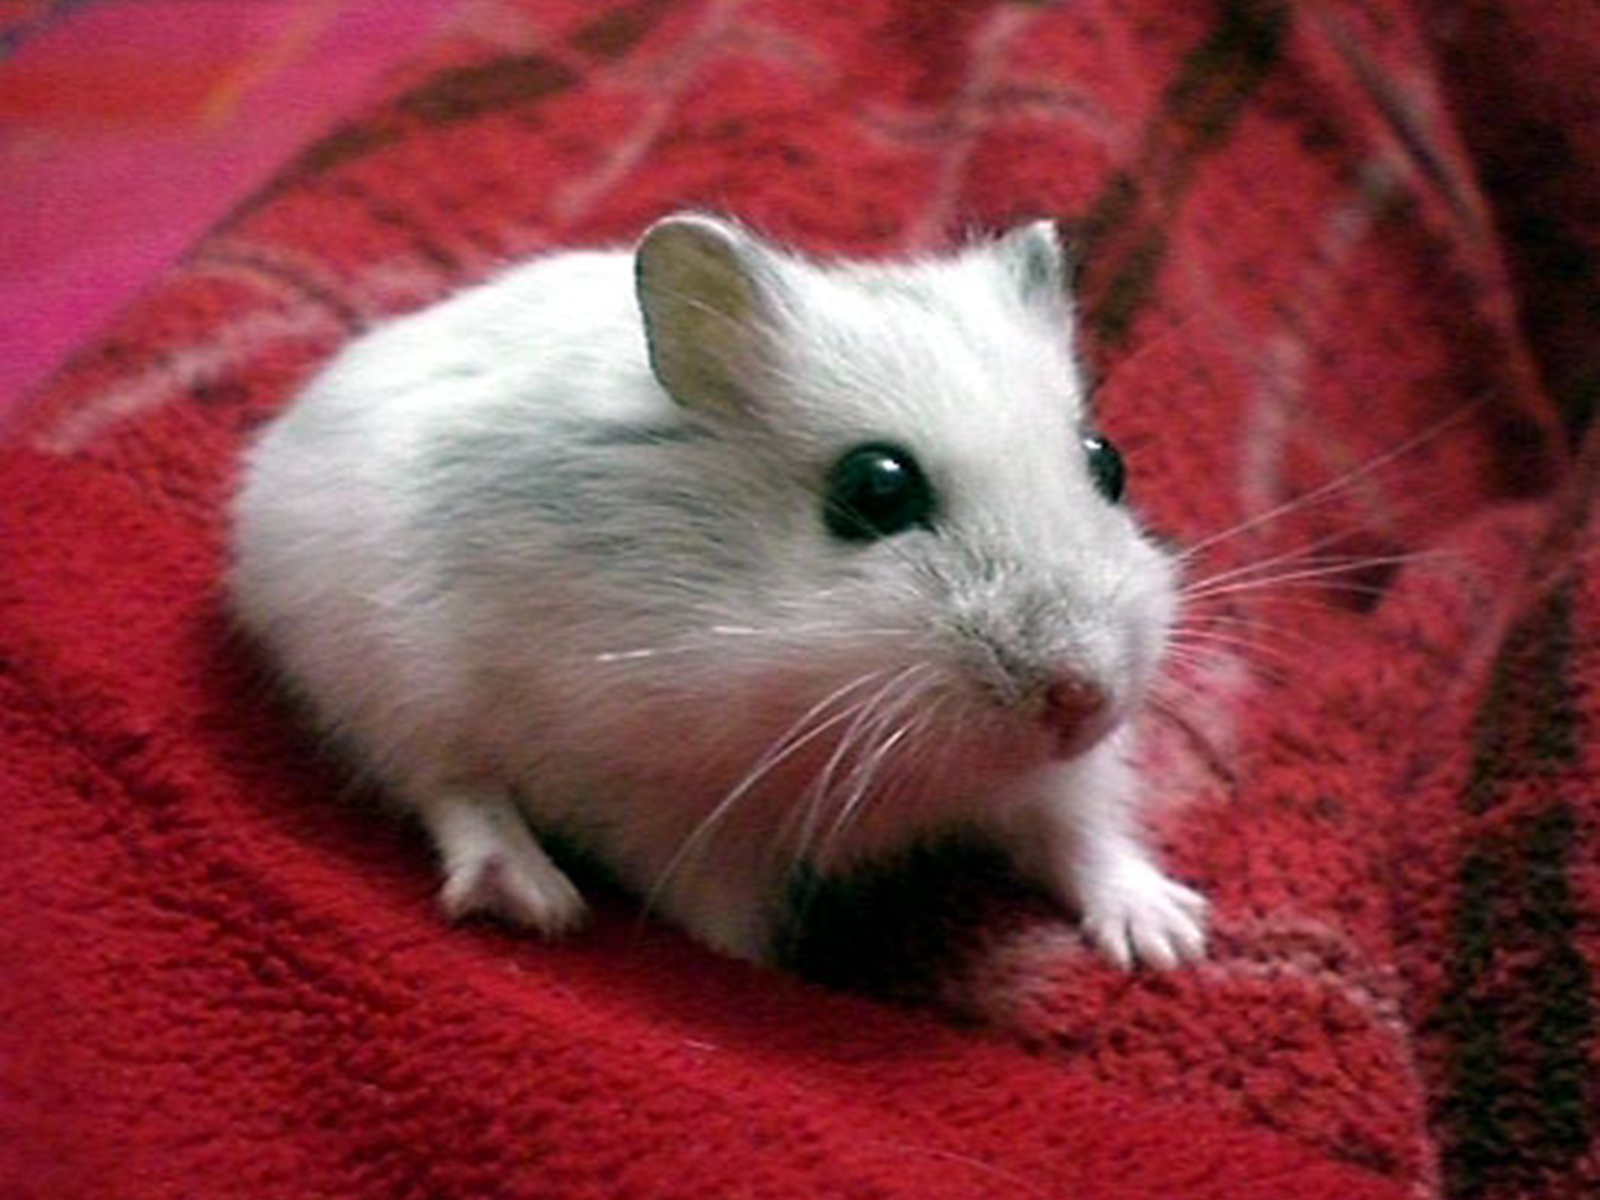 Cute Hamster WallpapersOther Pets Wallpapers Pictures Download 1600x1200